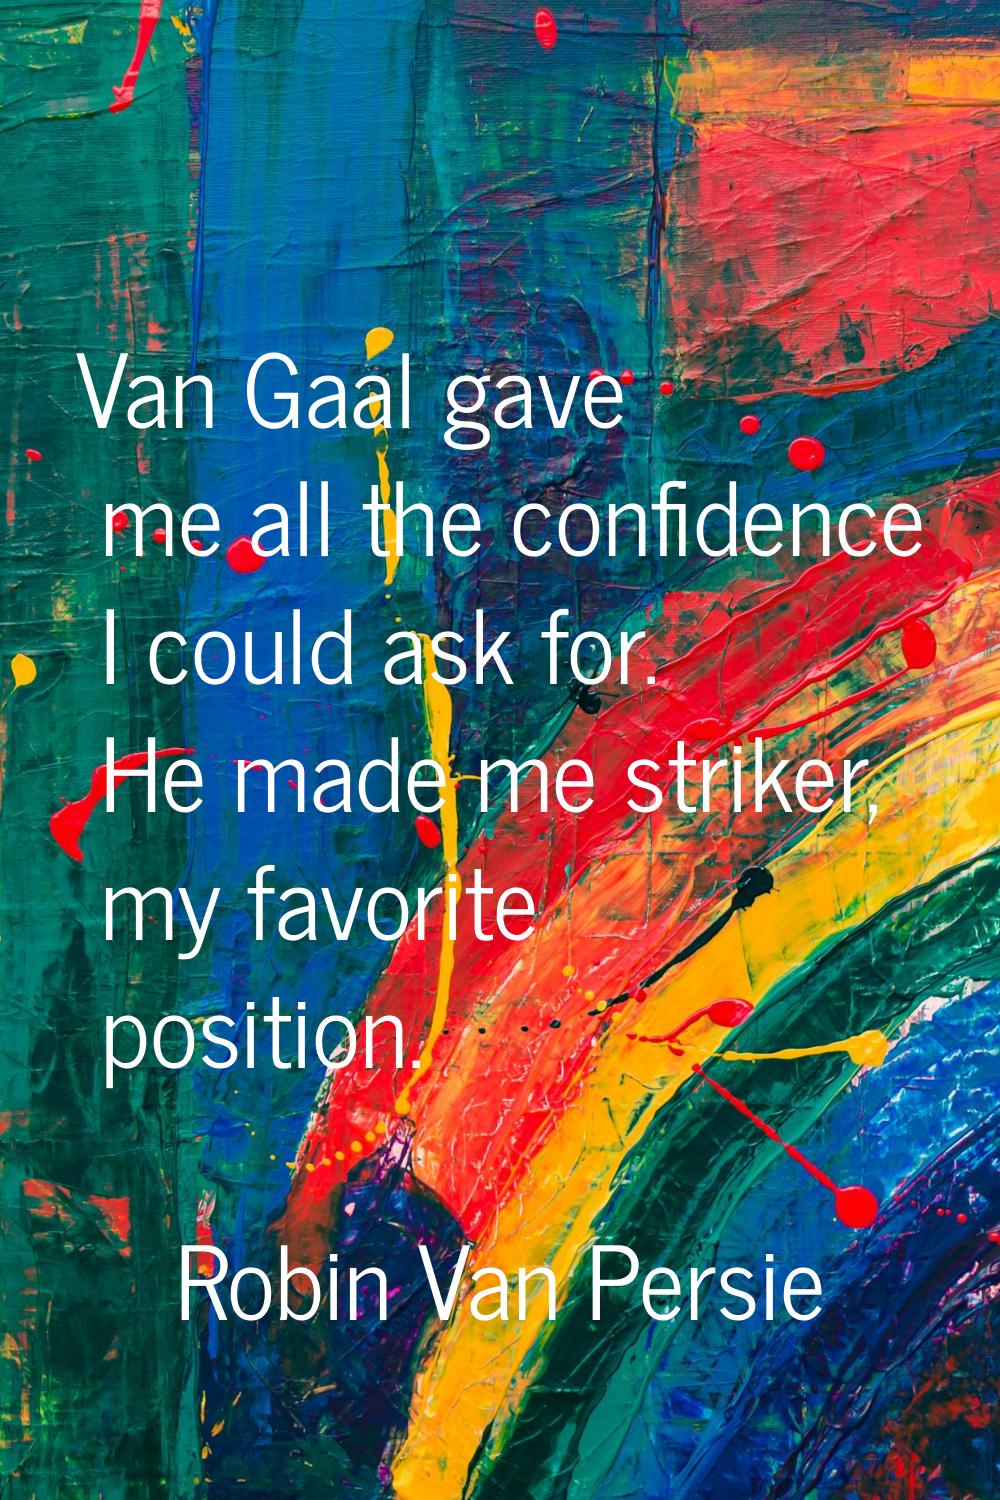 Van Gaal gave me all the confidence I could ask for. He made me striker, my favorite position.